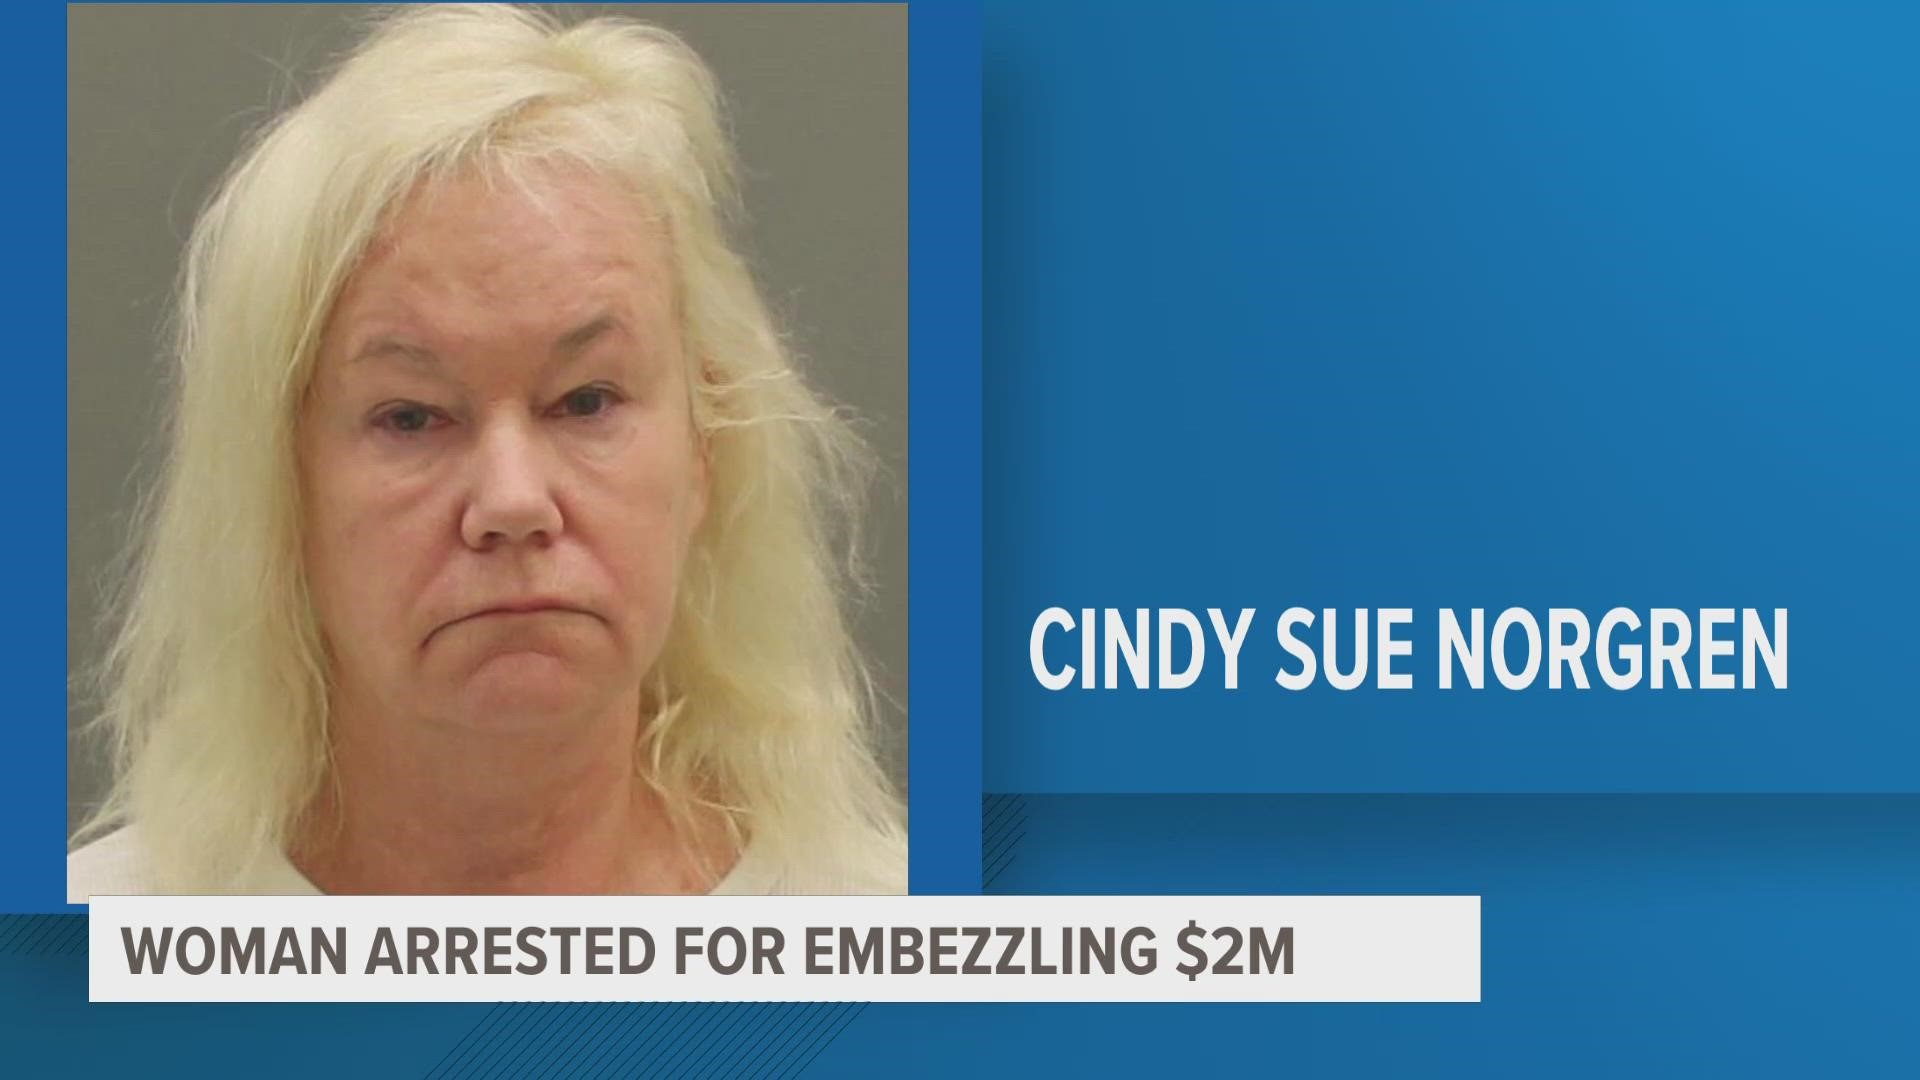 The 60-year-old from Spring Lake is accused of embezzling more than $2,000,000 from the organization.